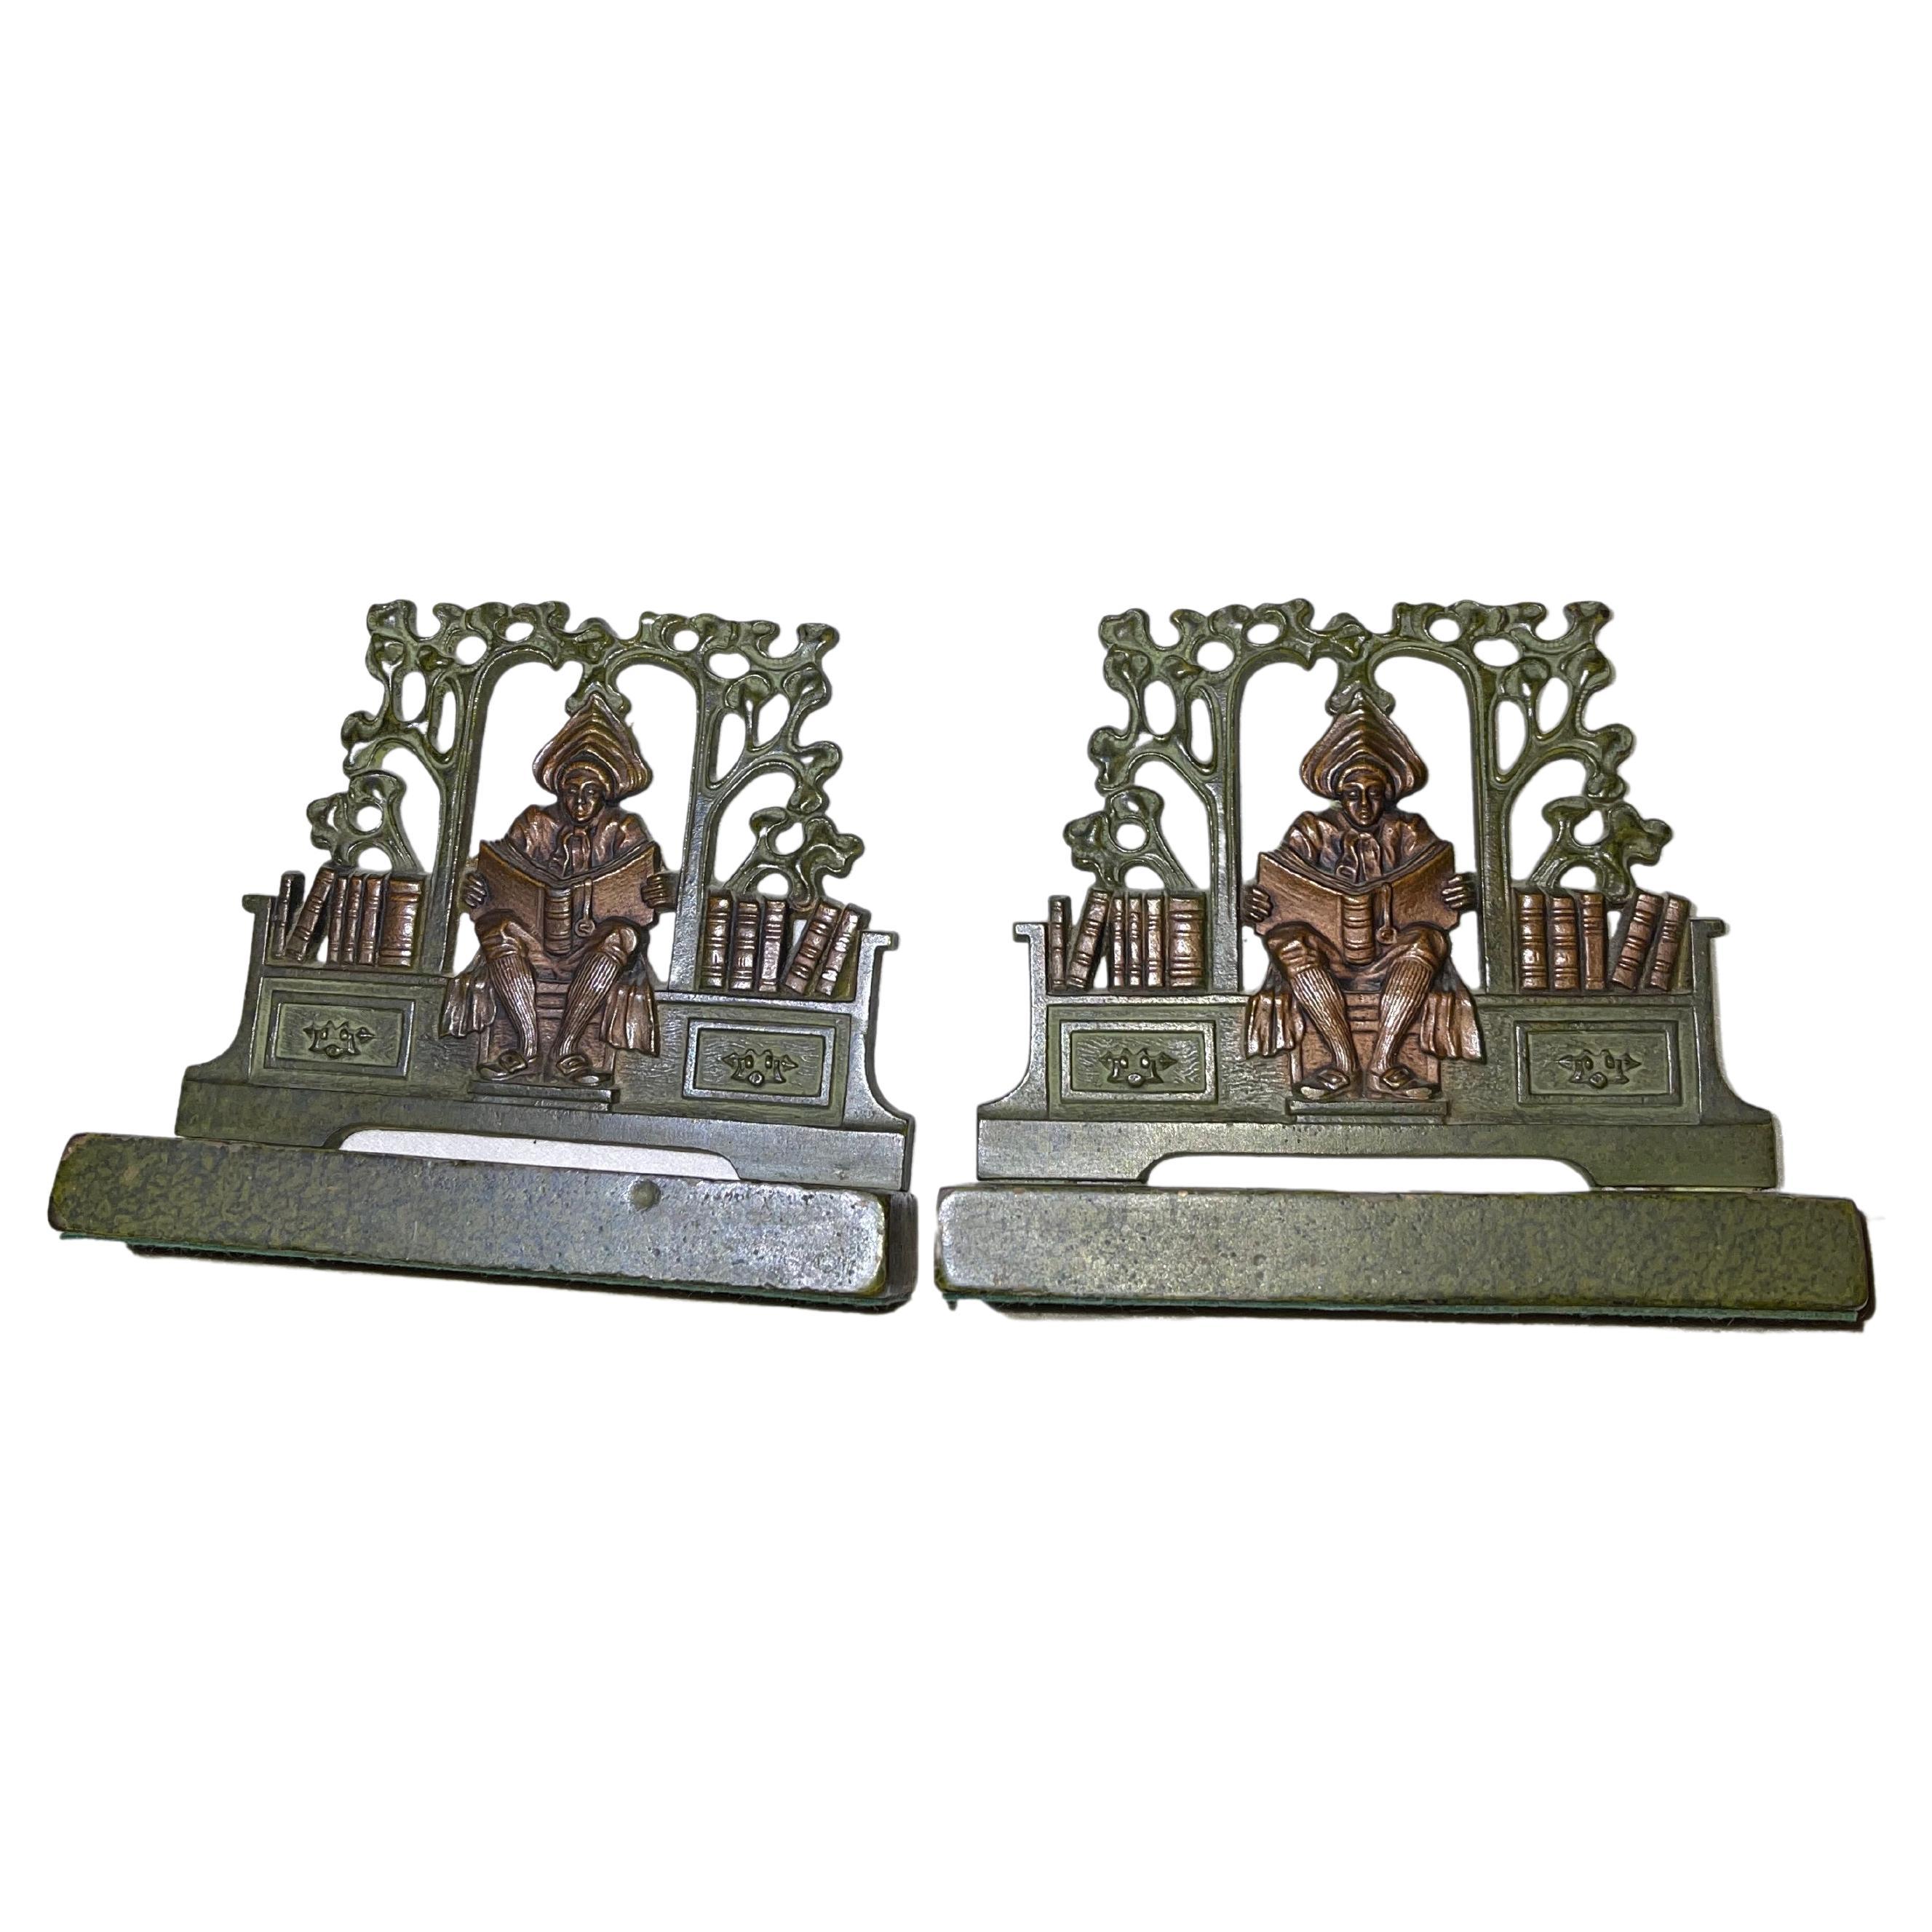 Pair of Bookends by Judd Co. w/ Factory Label "The Student" ca. 1910